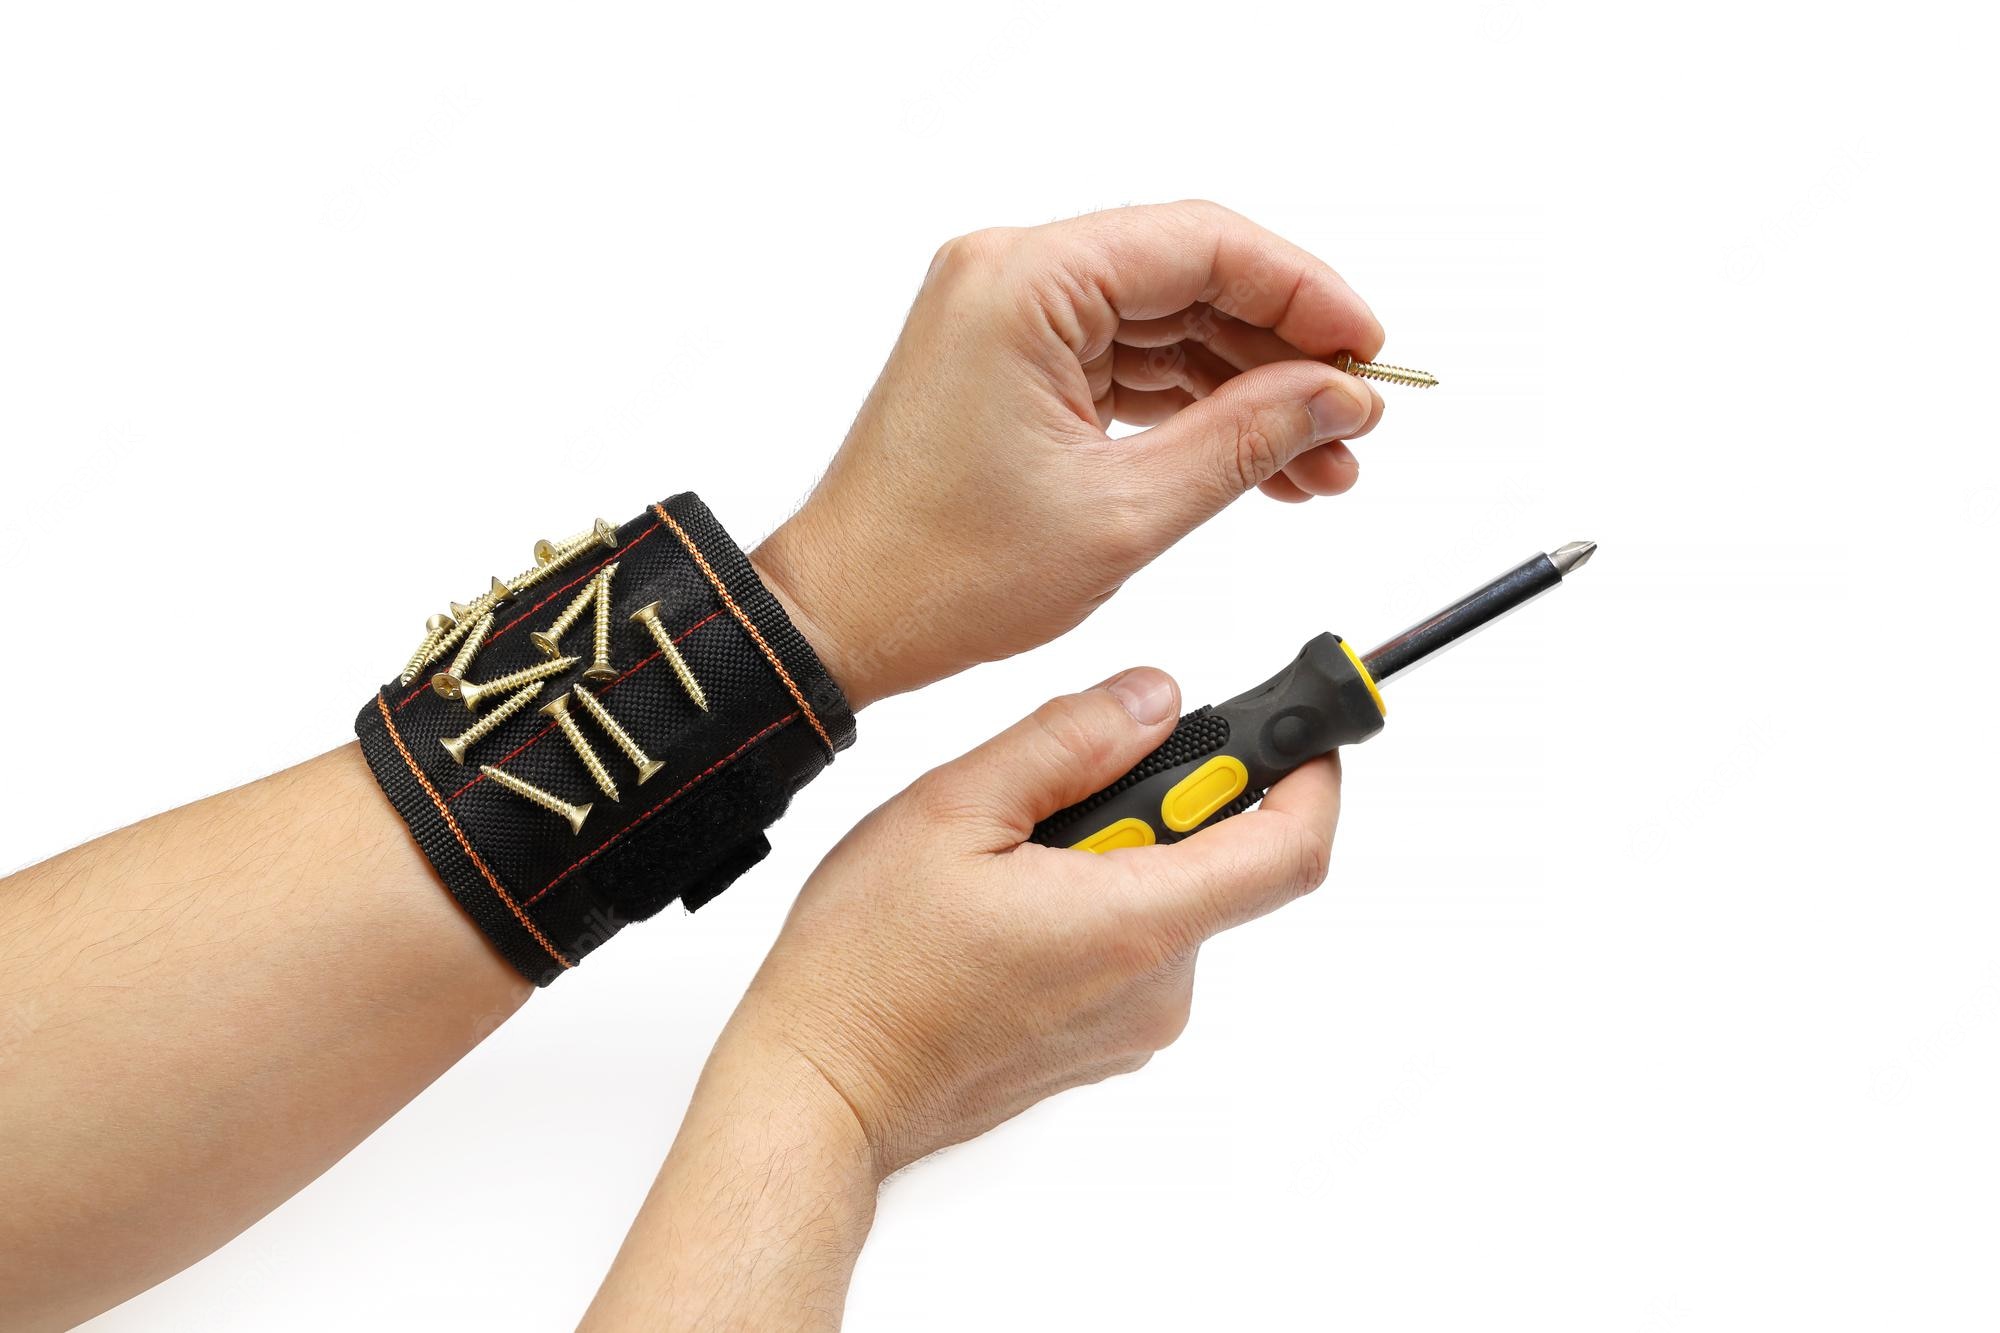 A person wearing a magnetic tool wristband on the left hand and holding a screwdriver on the right hand